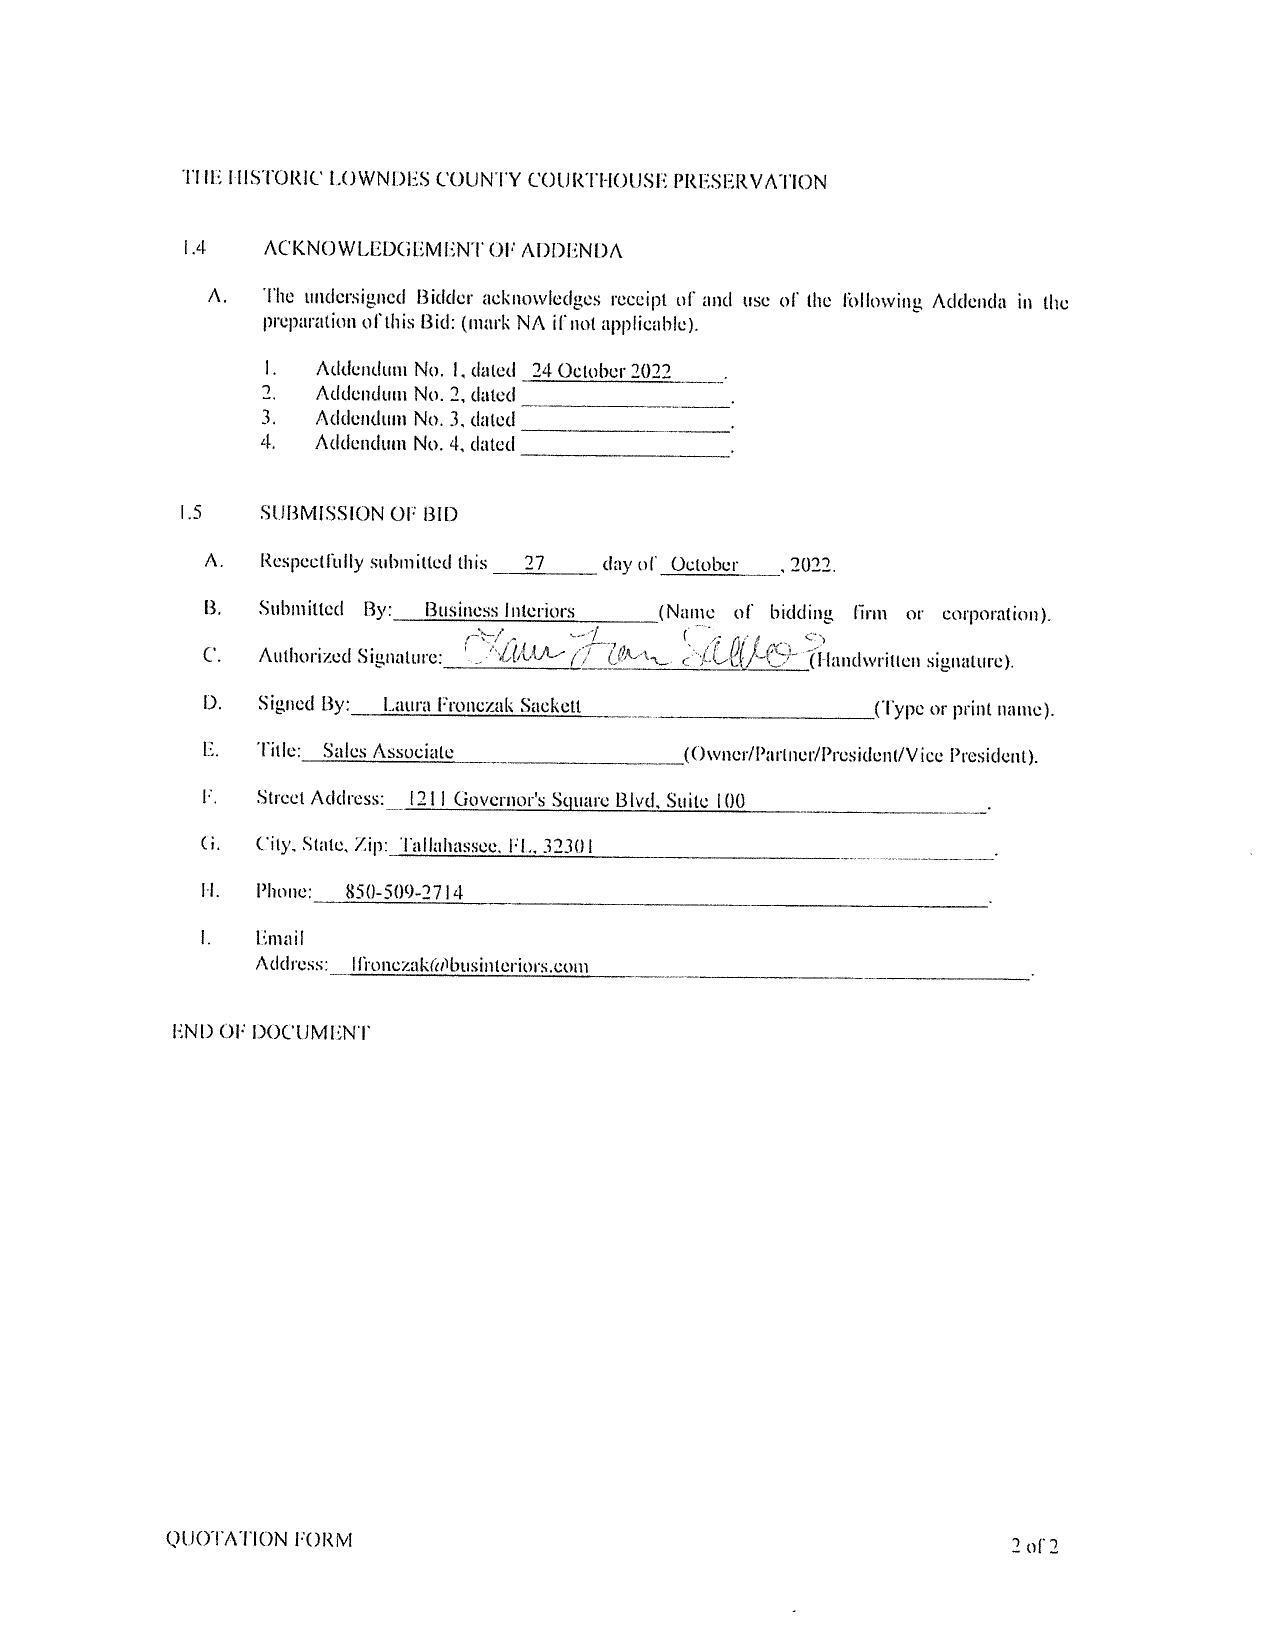 A. The undersigned Bidder acknowledges receipt of and use of the following Addenda in the